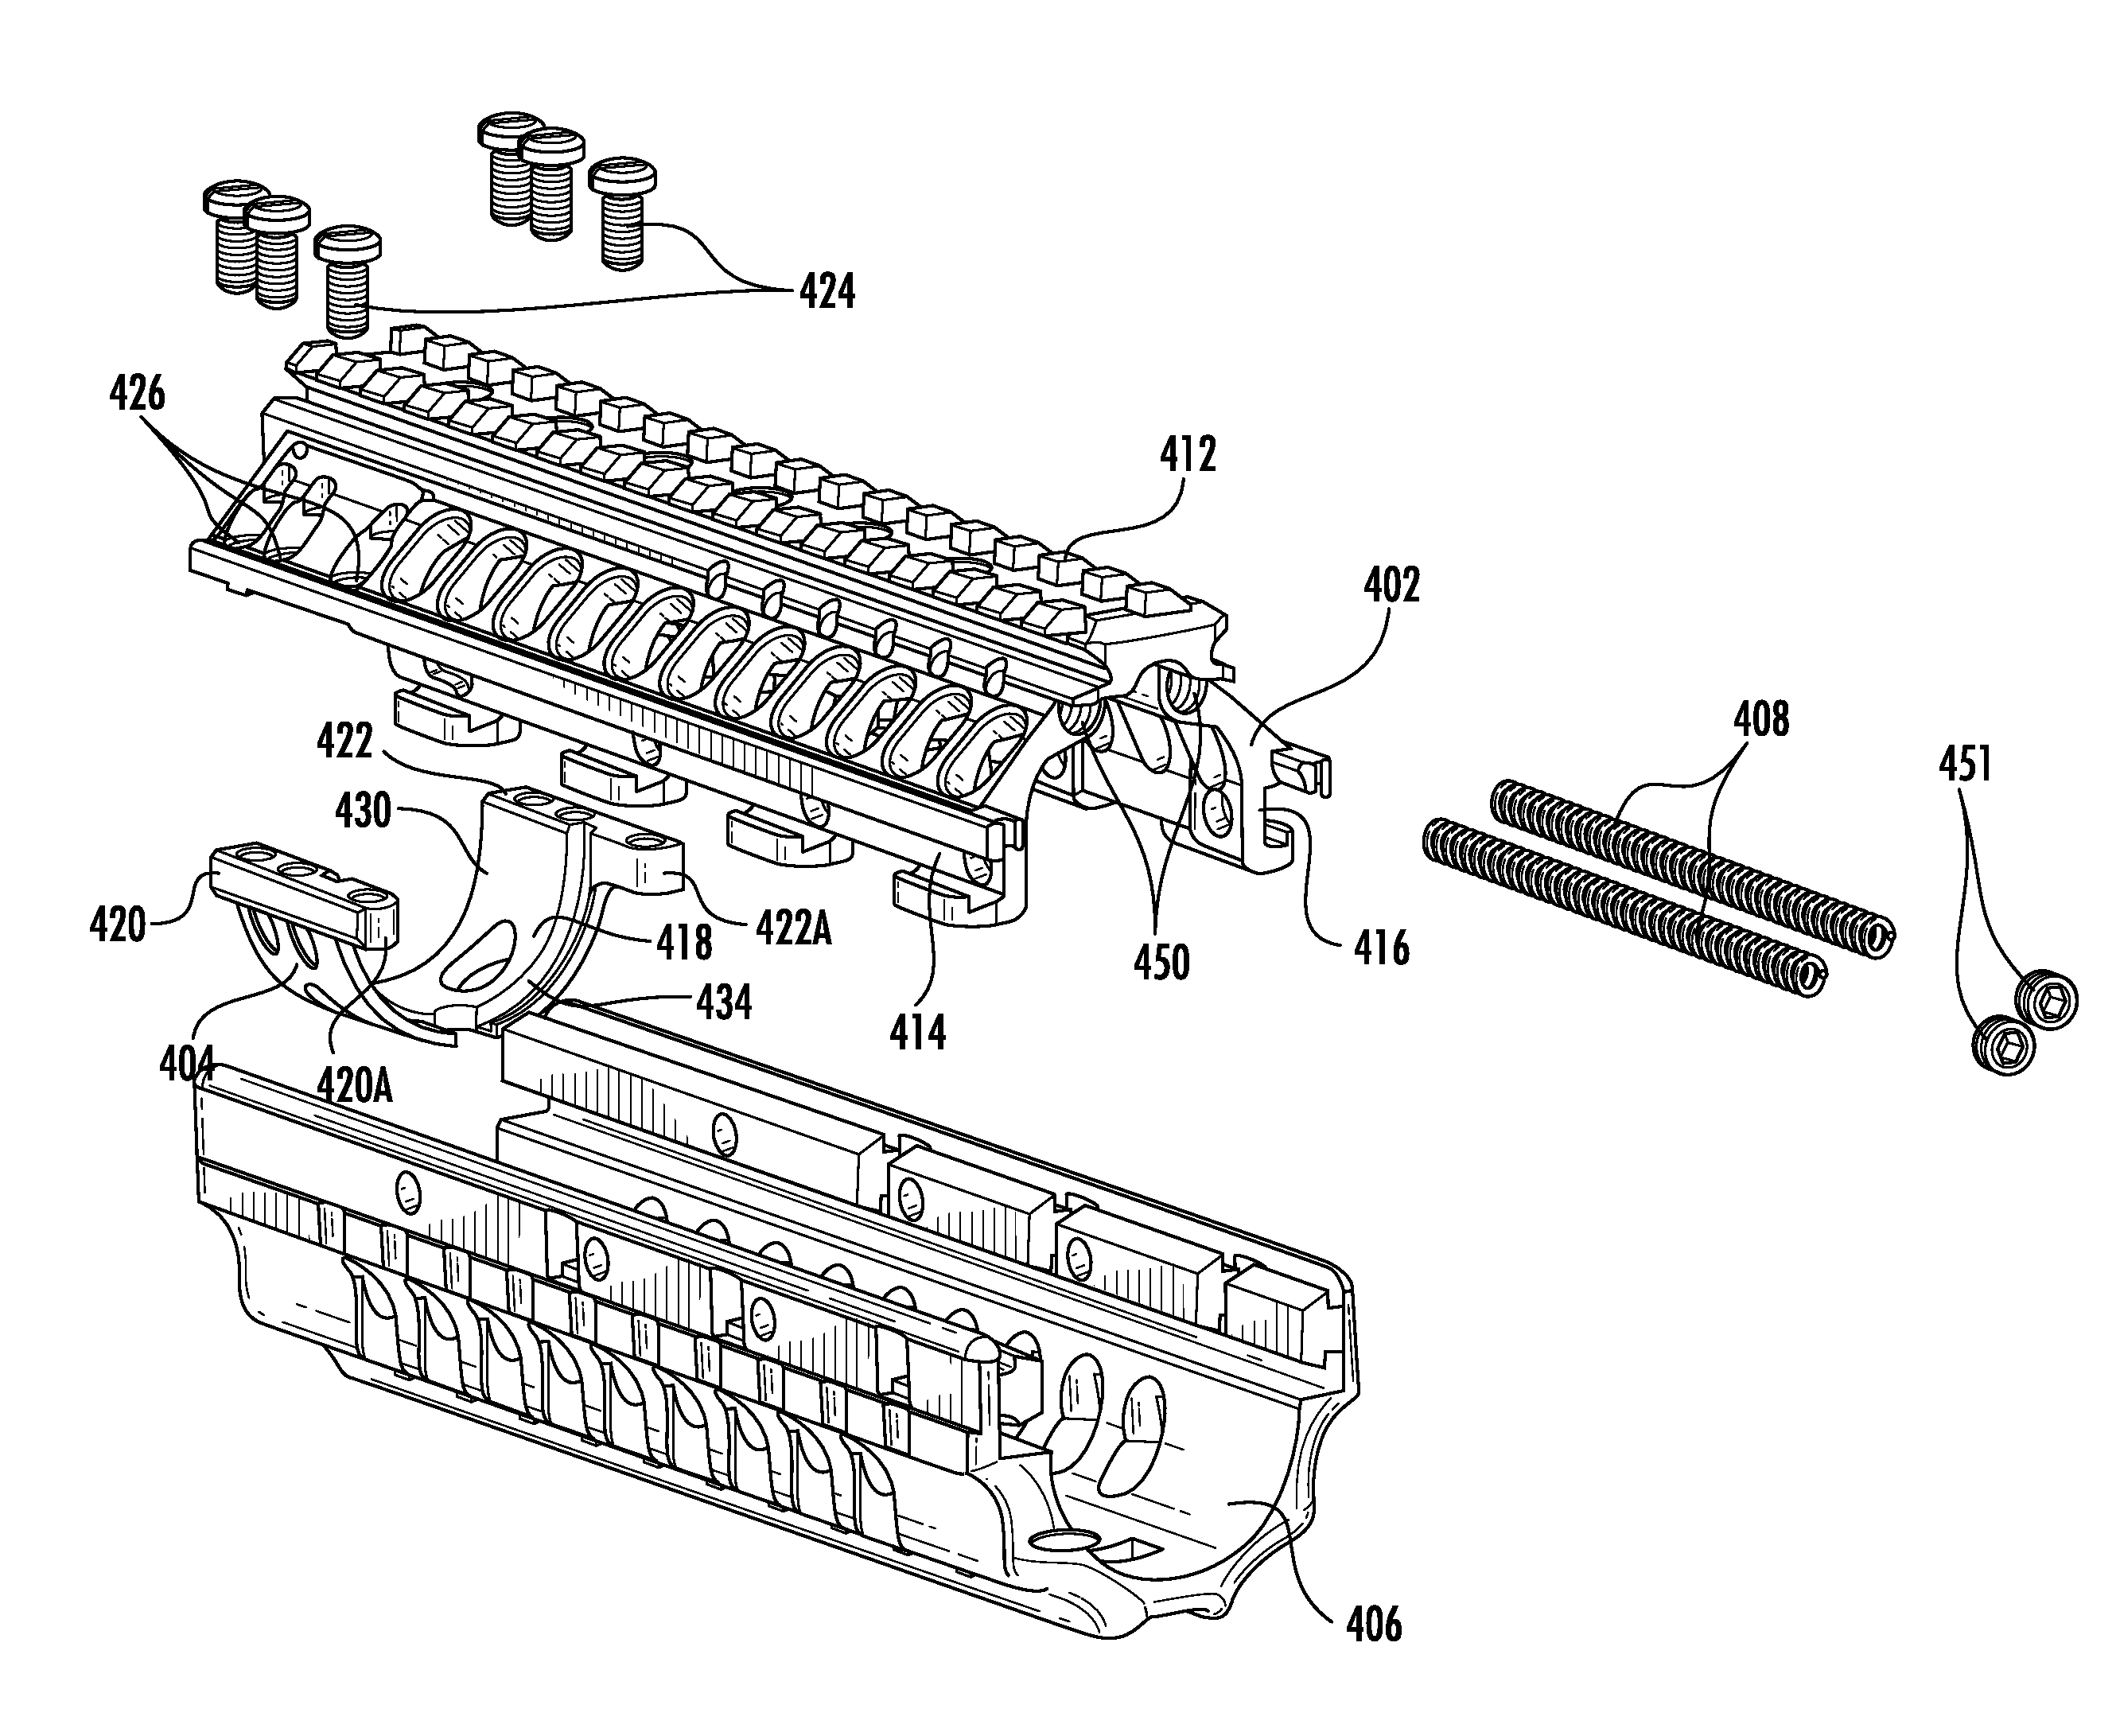 Modular integrated rail system including a dampening device